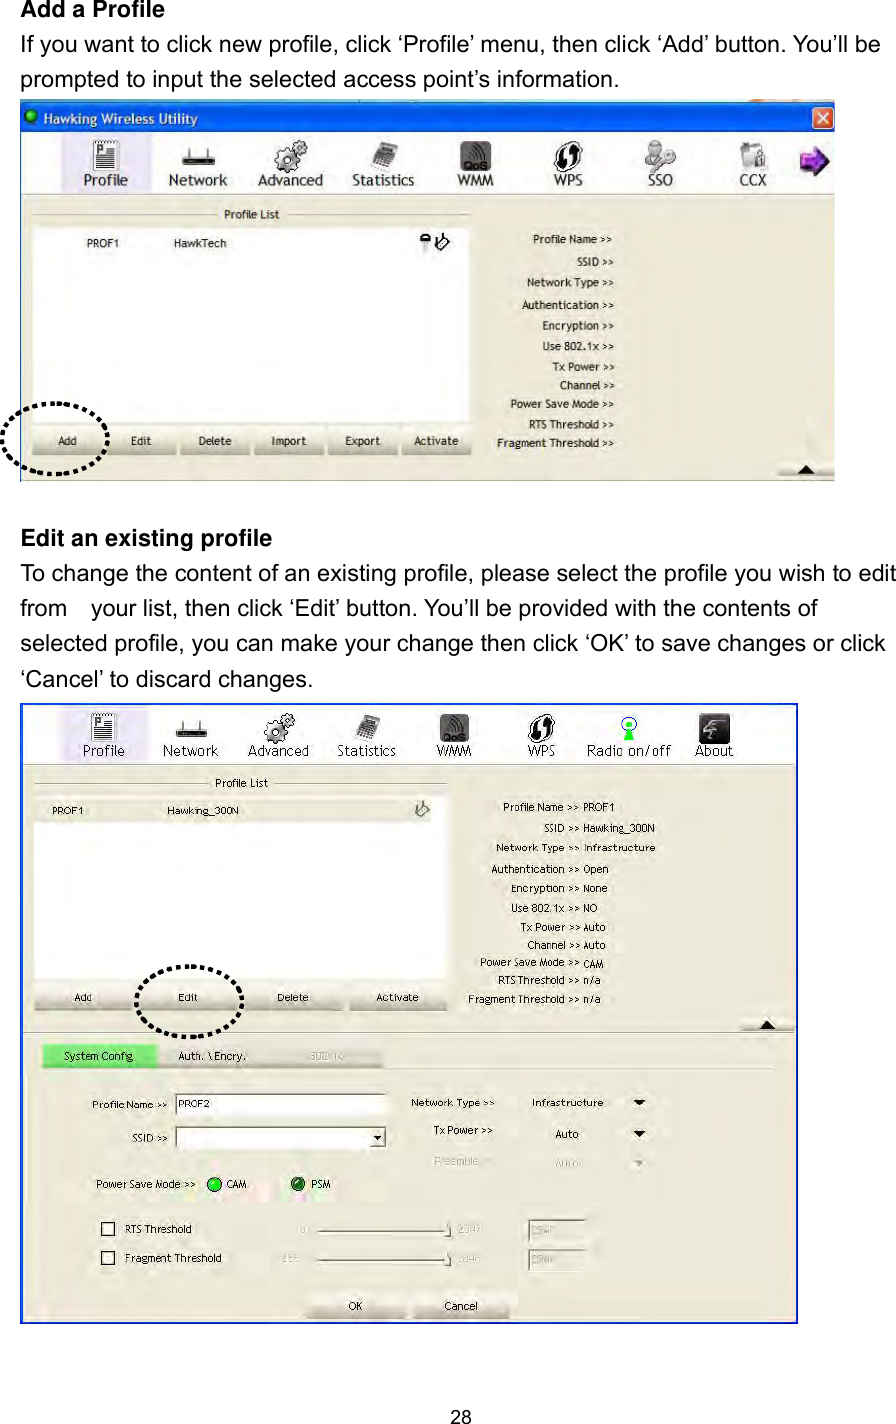  28 Add a Profile If you want to click new profile, click ‘Profile’ menu, then click ‘Add’ button. You’ll be prompted to input the selected access point’s information.   Edit an existing profile To change the content of an existing profile, please select the profile you wish to edit from    your list, then click ‘Edit’ button. You’ll be provided with the contents of selected profile, you can make your change then click ‘OK’ to save changes or click ‘Cancel’ to discard changes.    